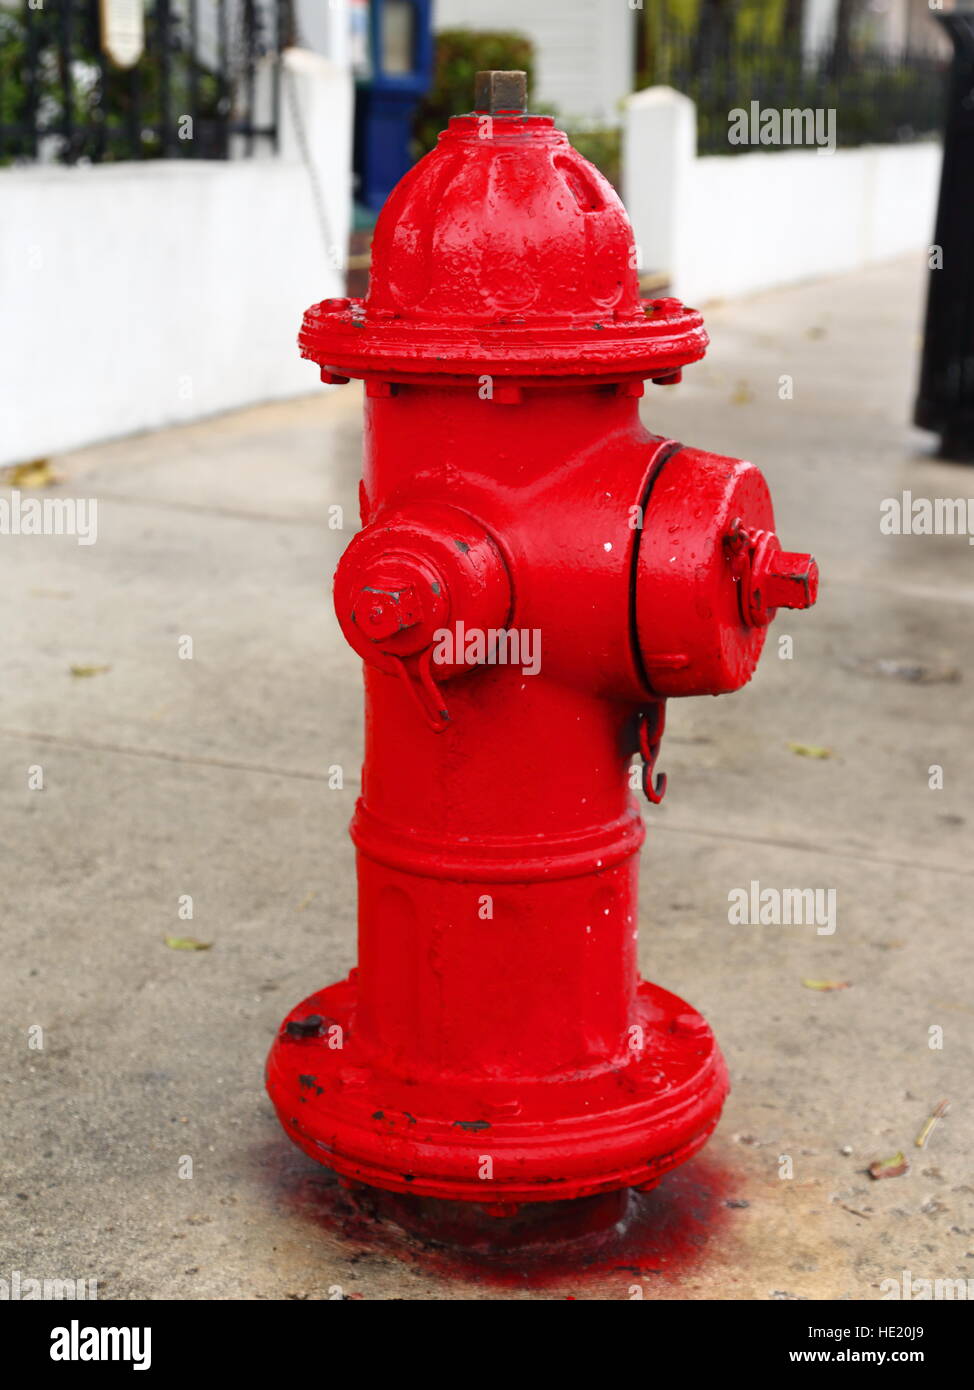 Red Fire Hydrant in Key West, Florida, USA Stockfoto